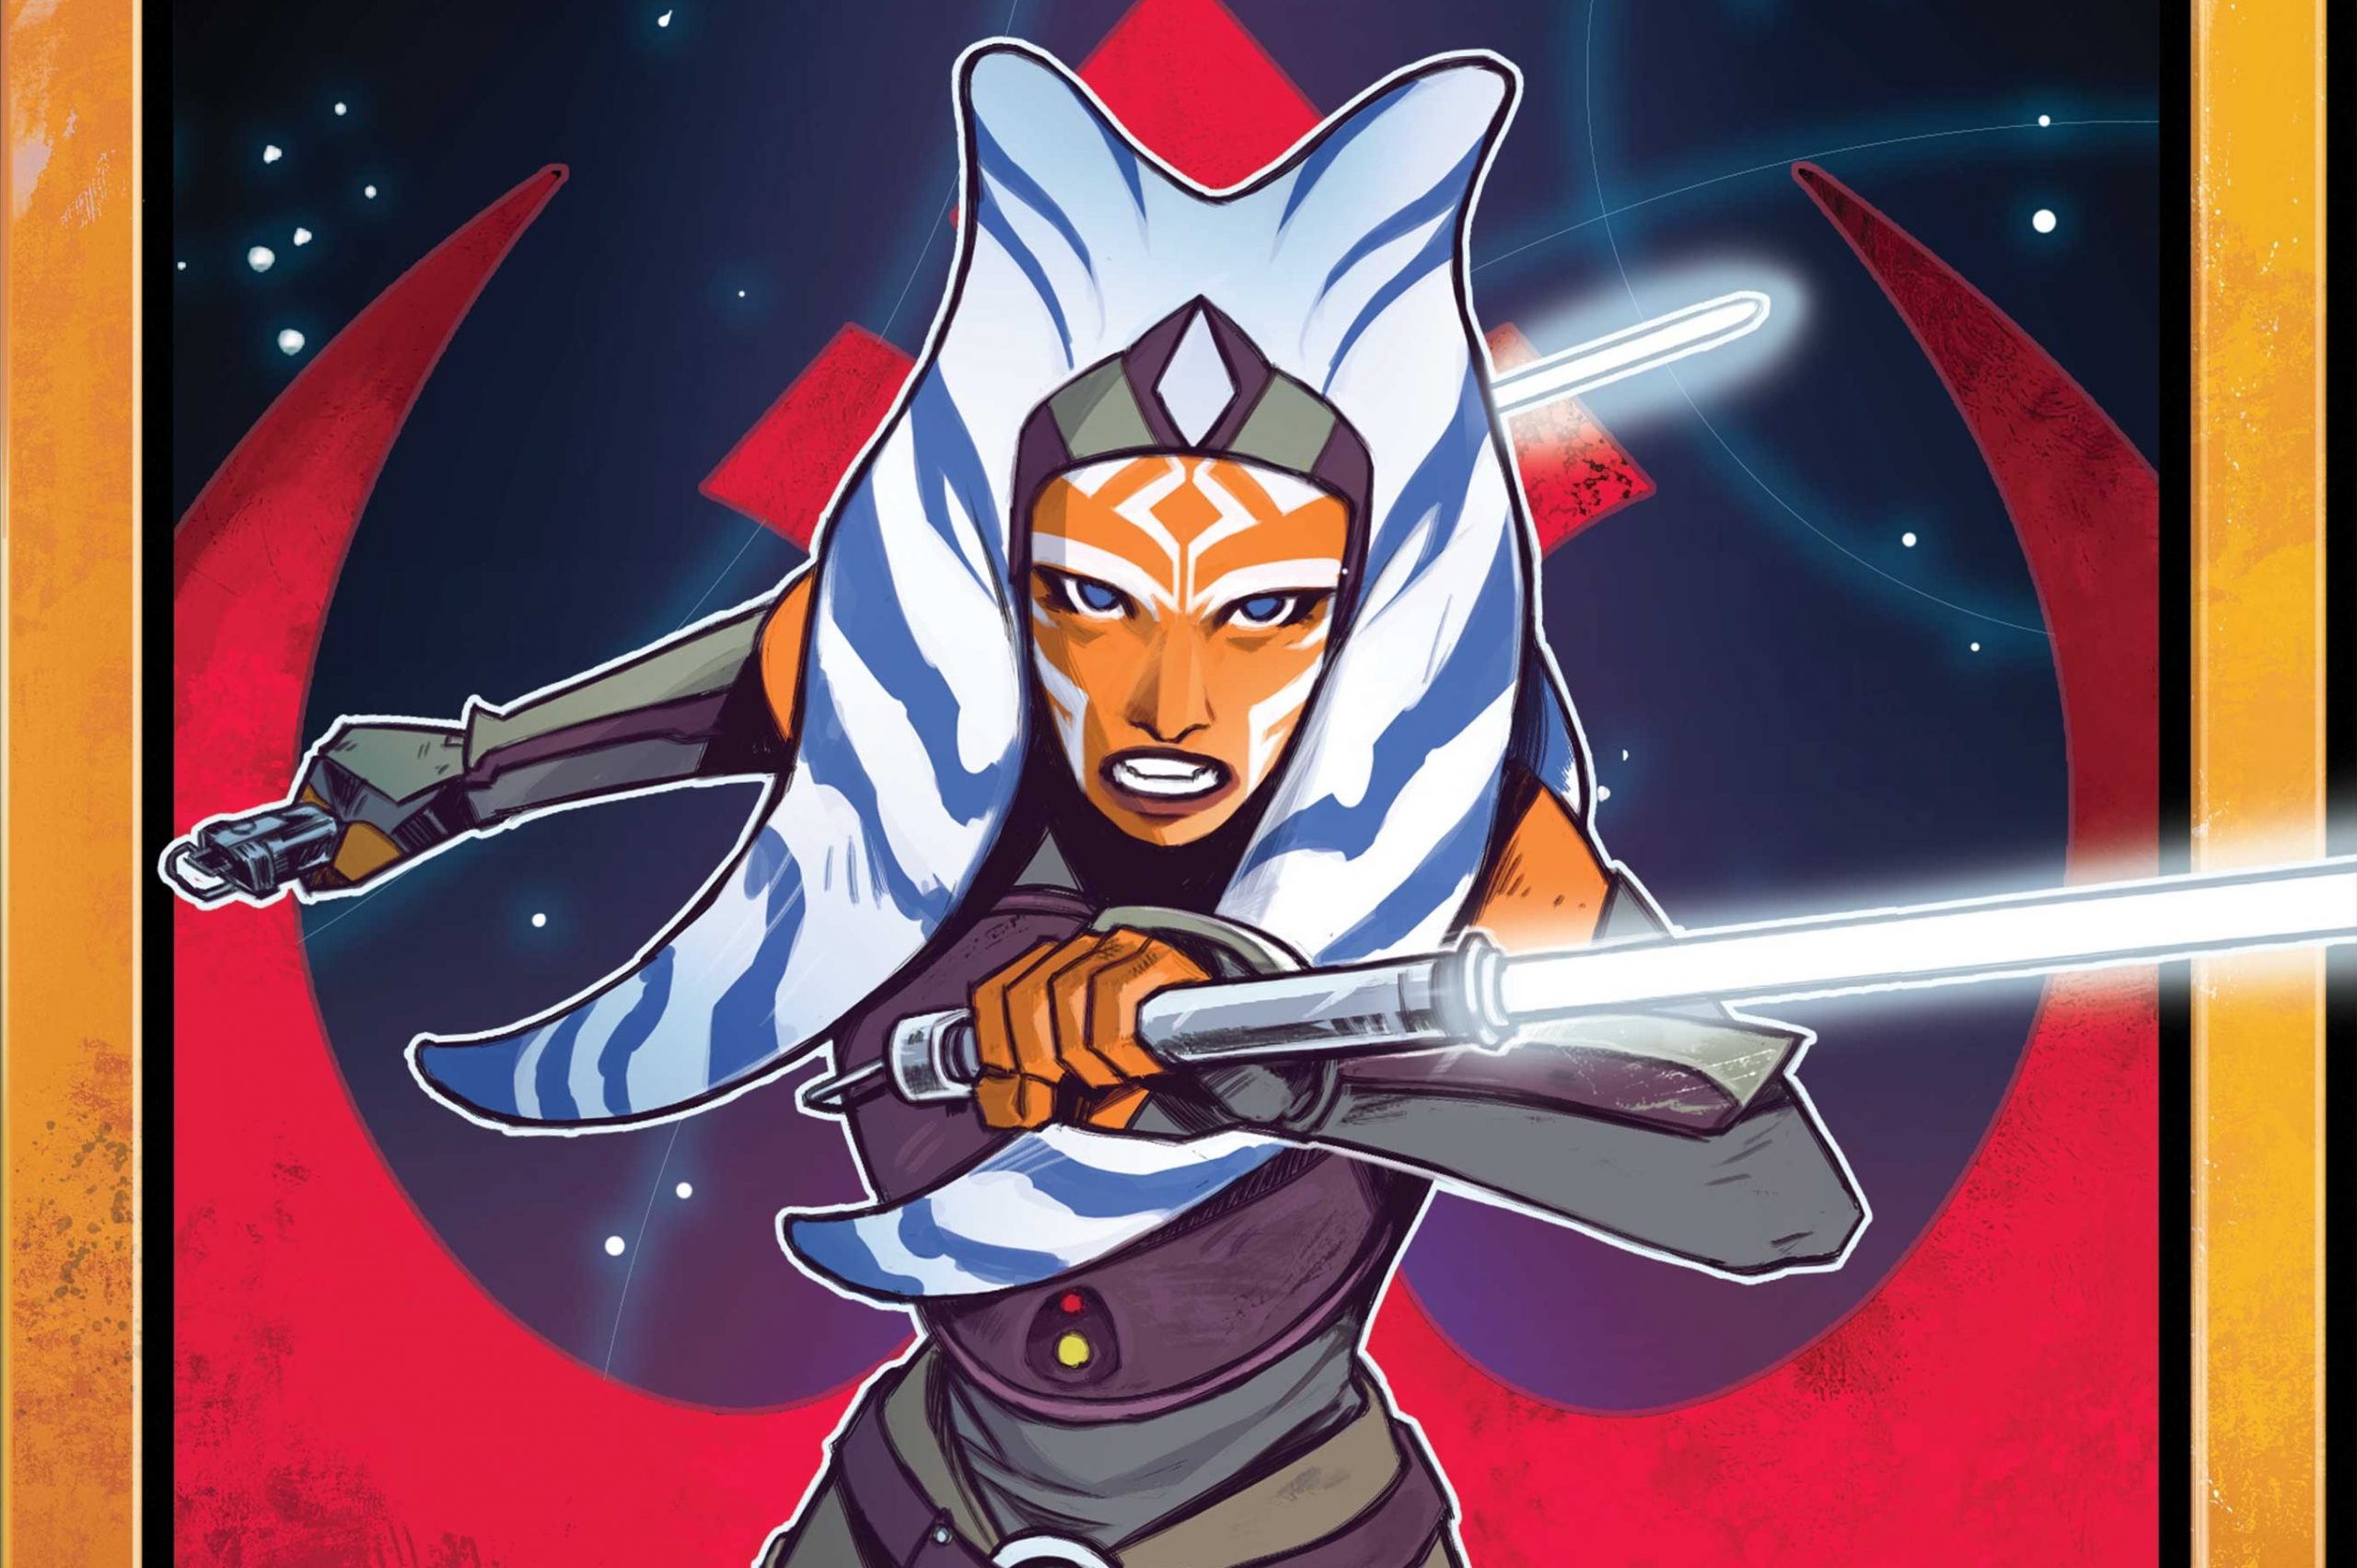 Marvel celebrates 'Star Wars: Rebels' 10th anniversary with variant covers